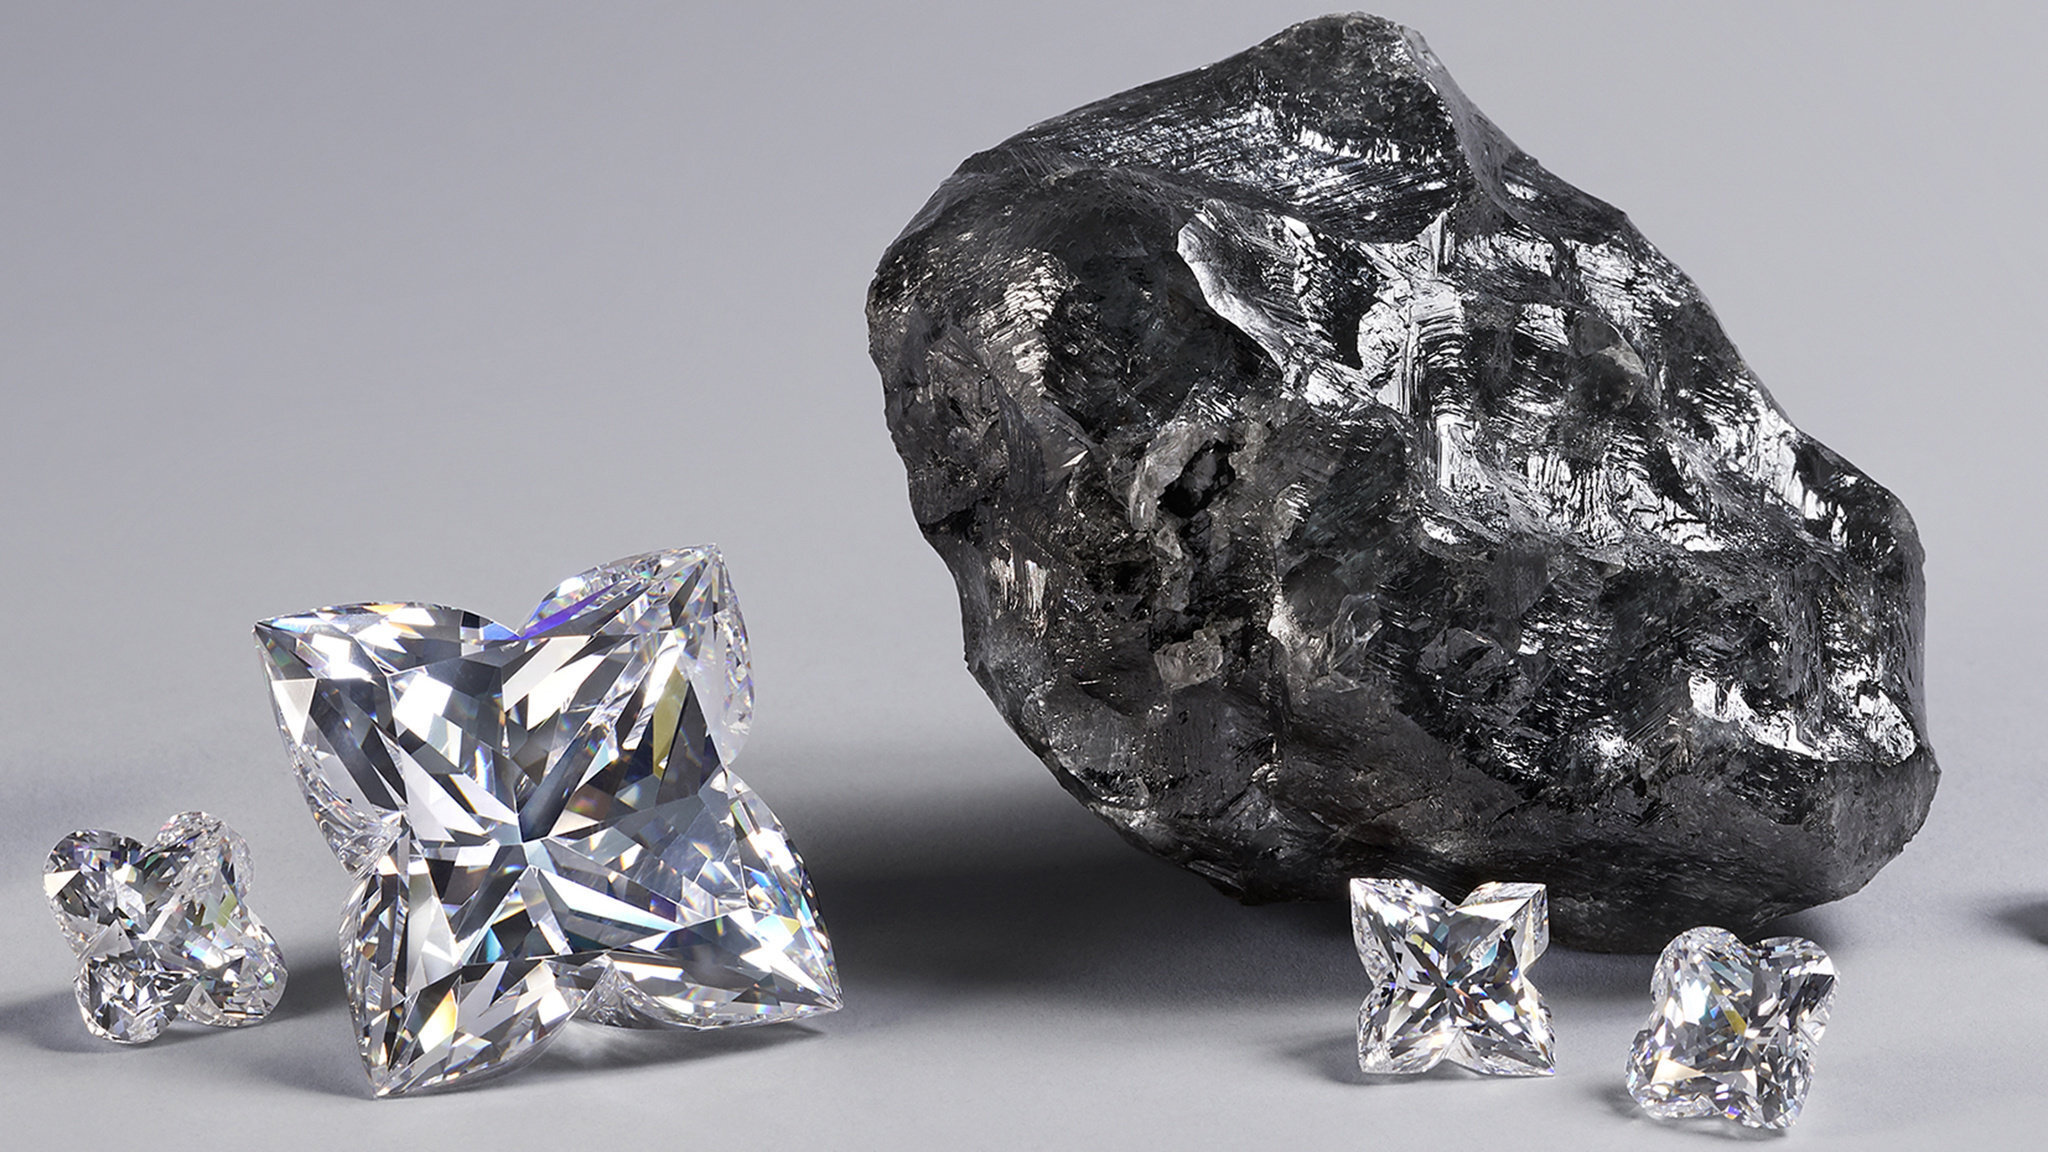 Tiny Kingdom, Big Results: Lesotho Produces Another 200+ Carat